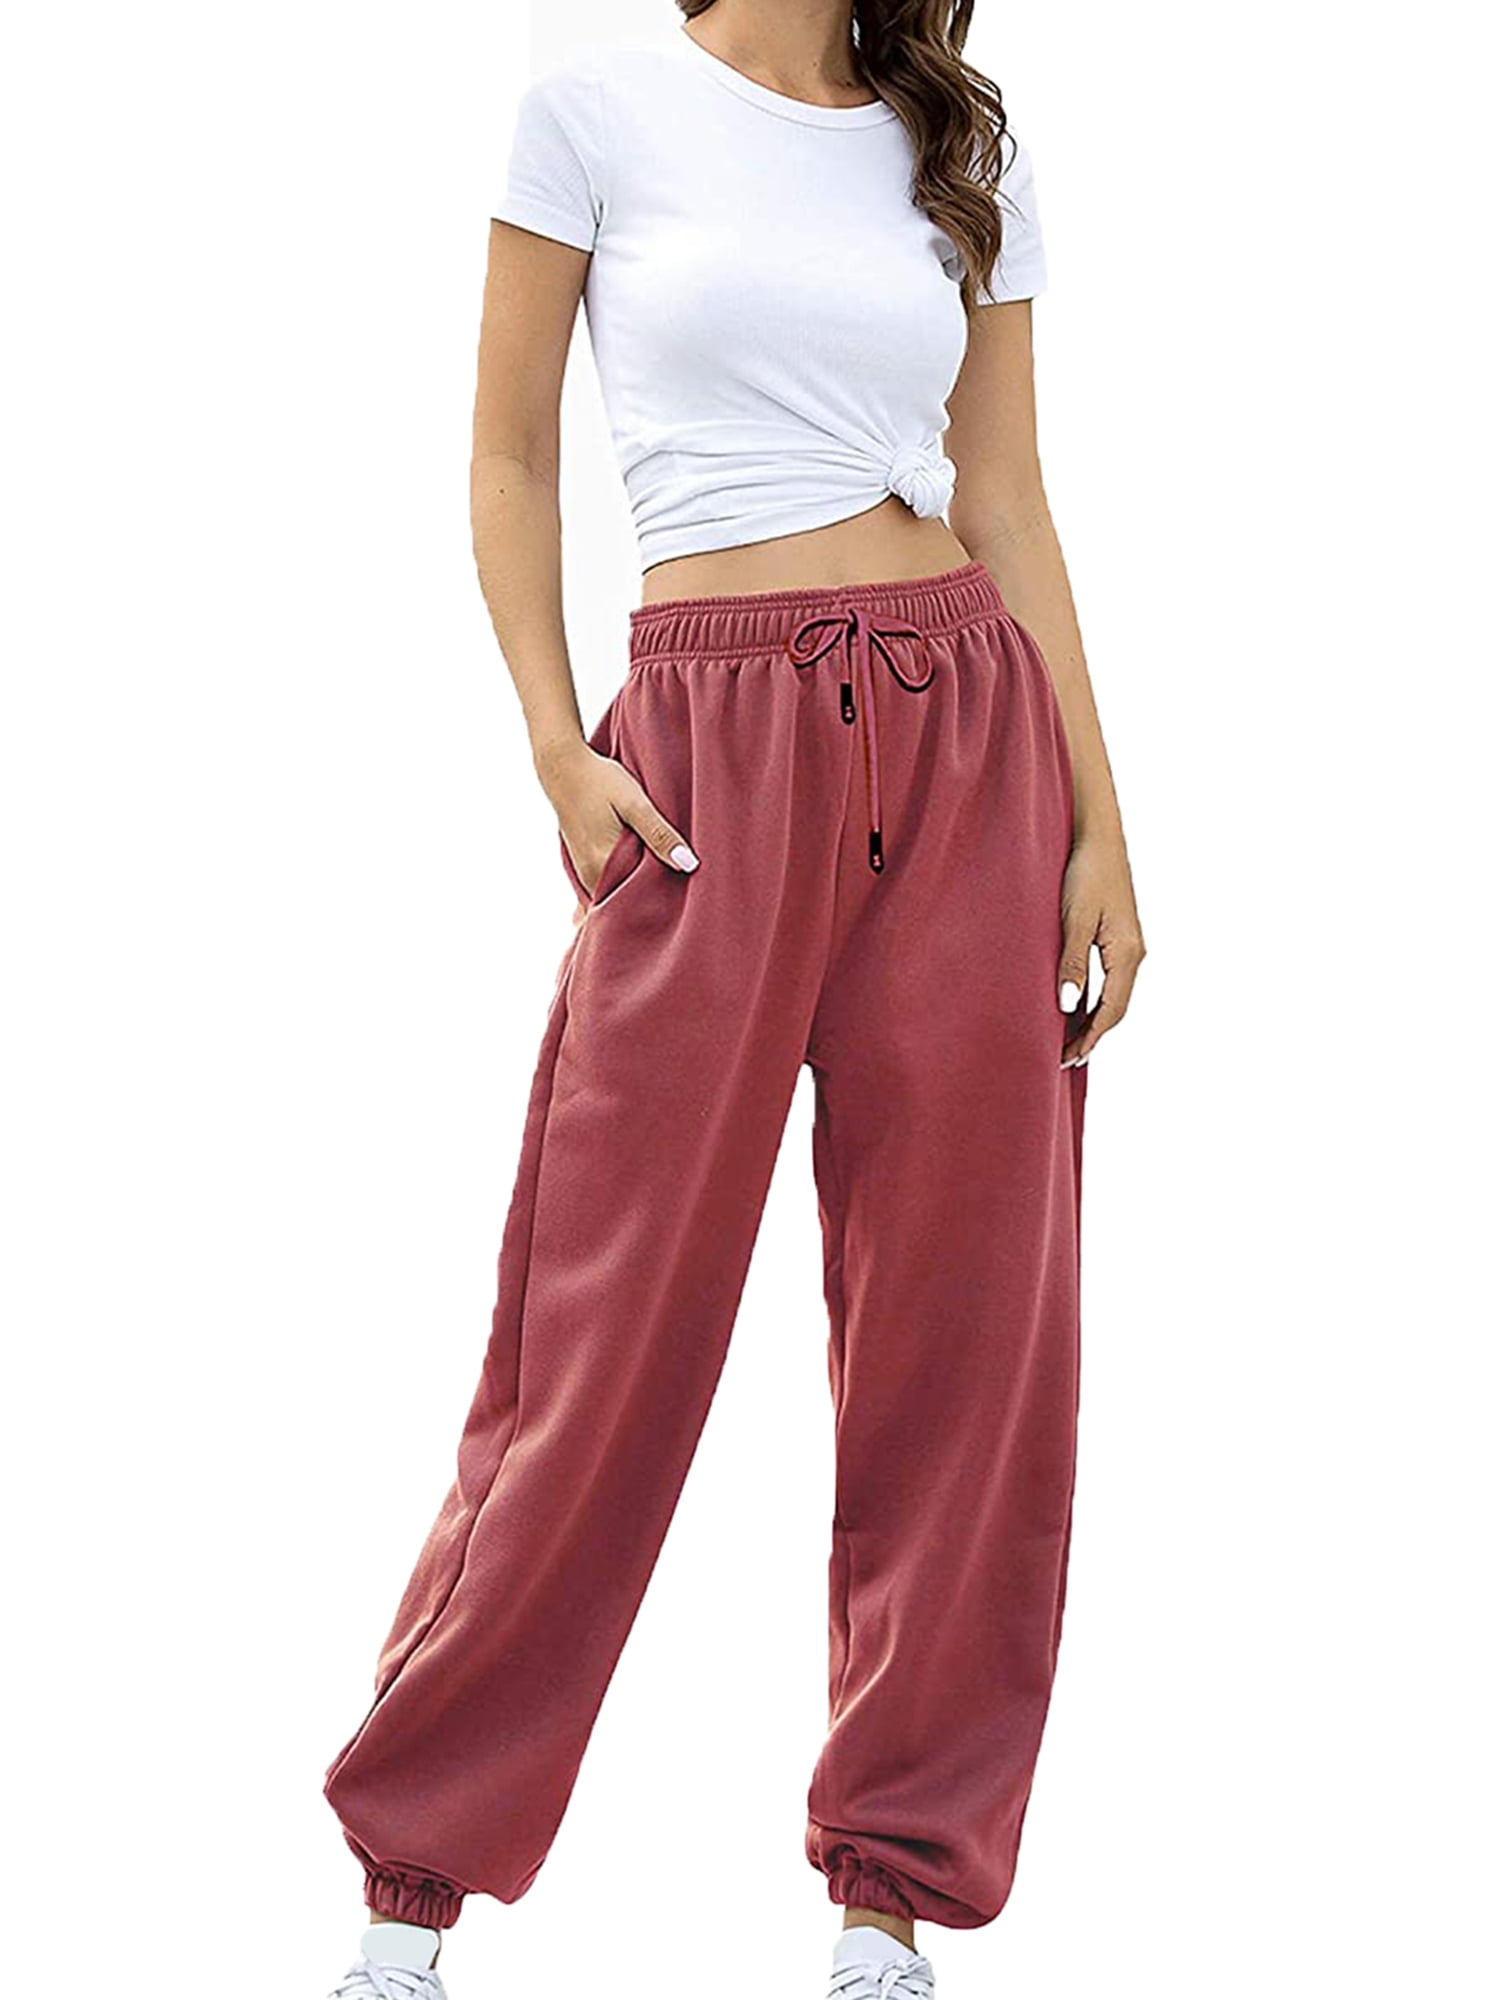  HGps8w Women's Jogger Sweatpants – Lightweight Elastic  Drawstring Waist Fleece Athletic Workout Track Pants with Pockets :  Clothing, Shoes & Jewelry